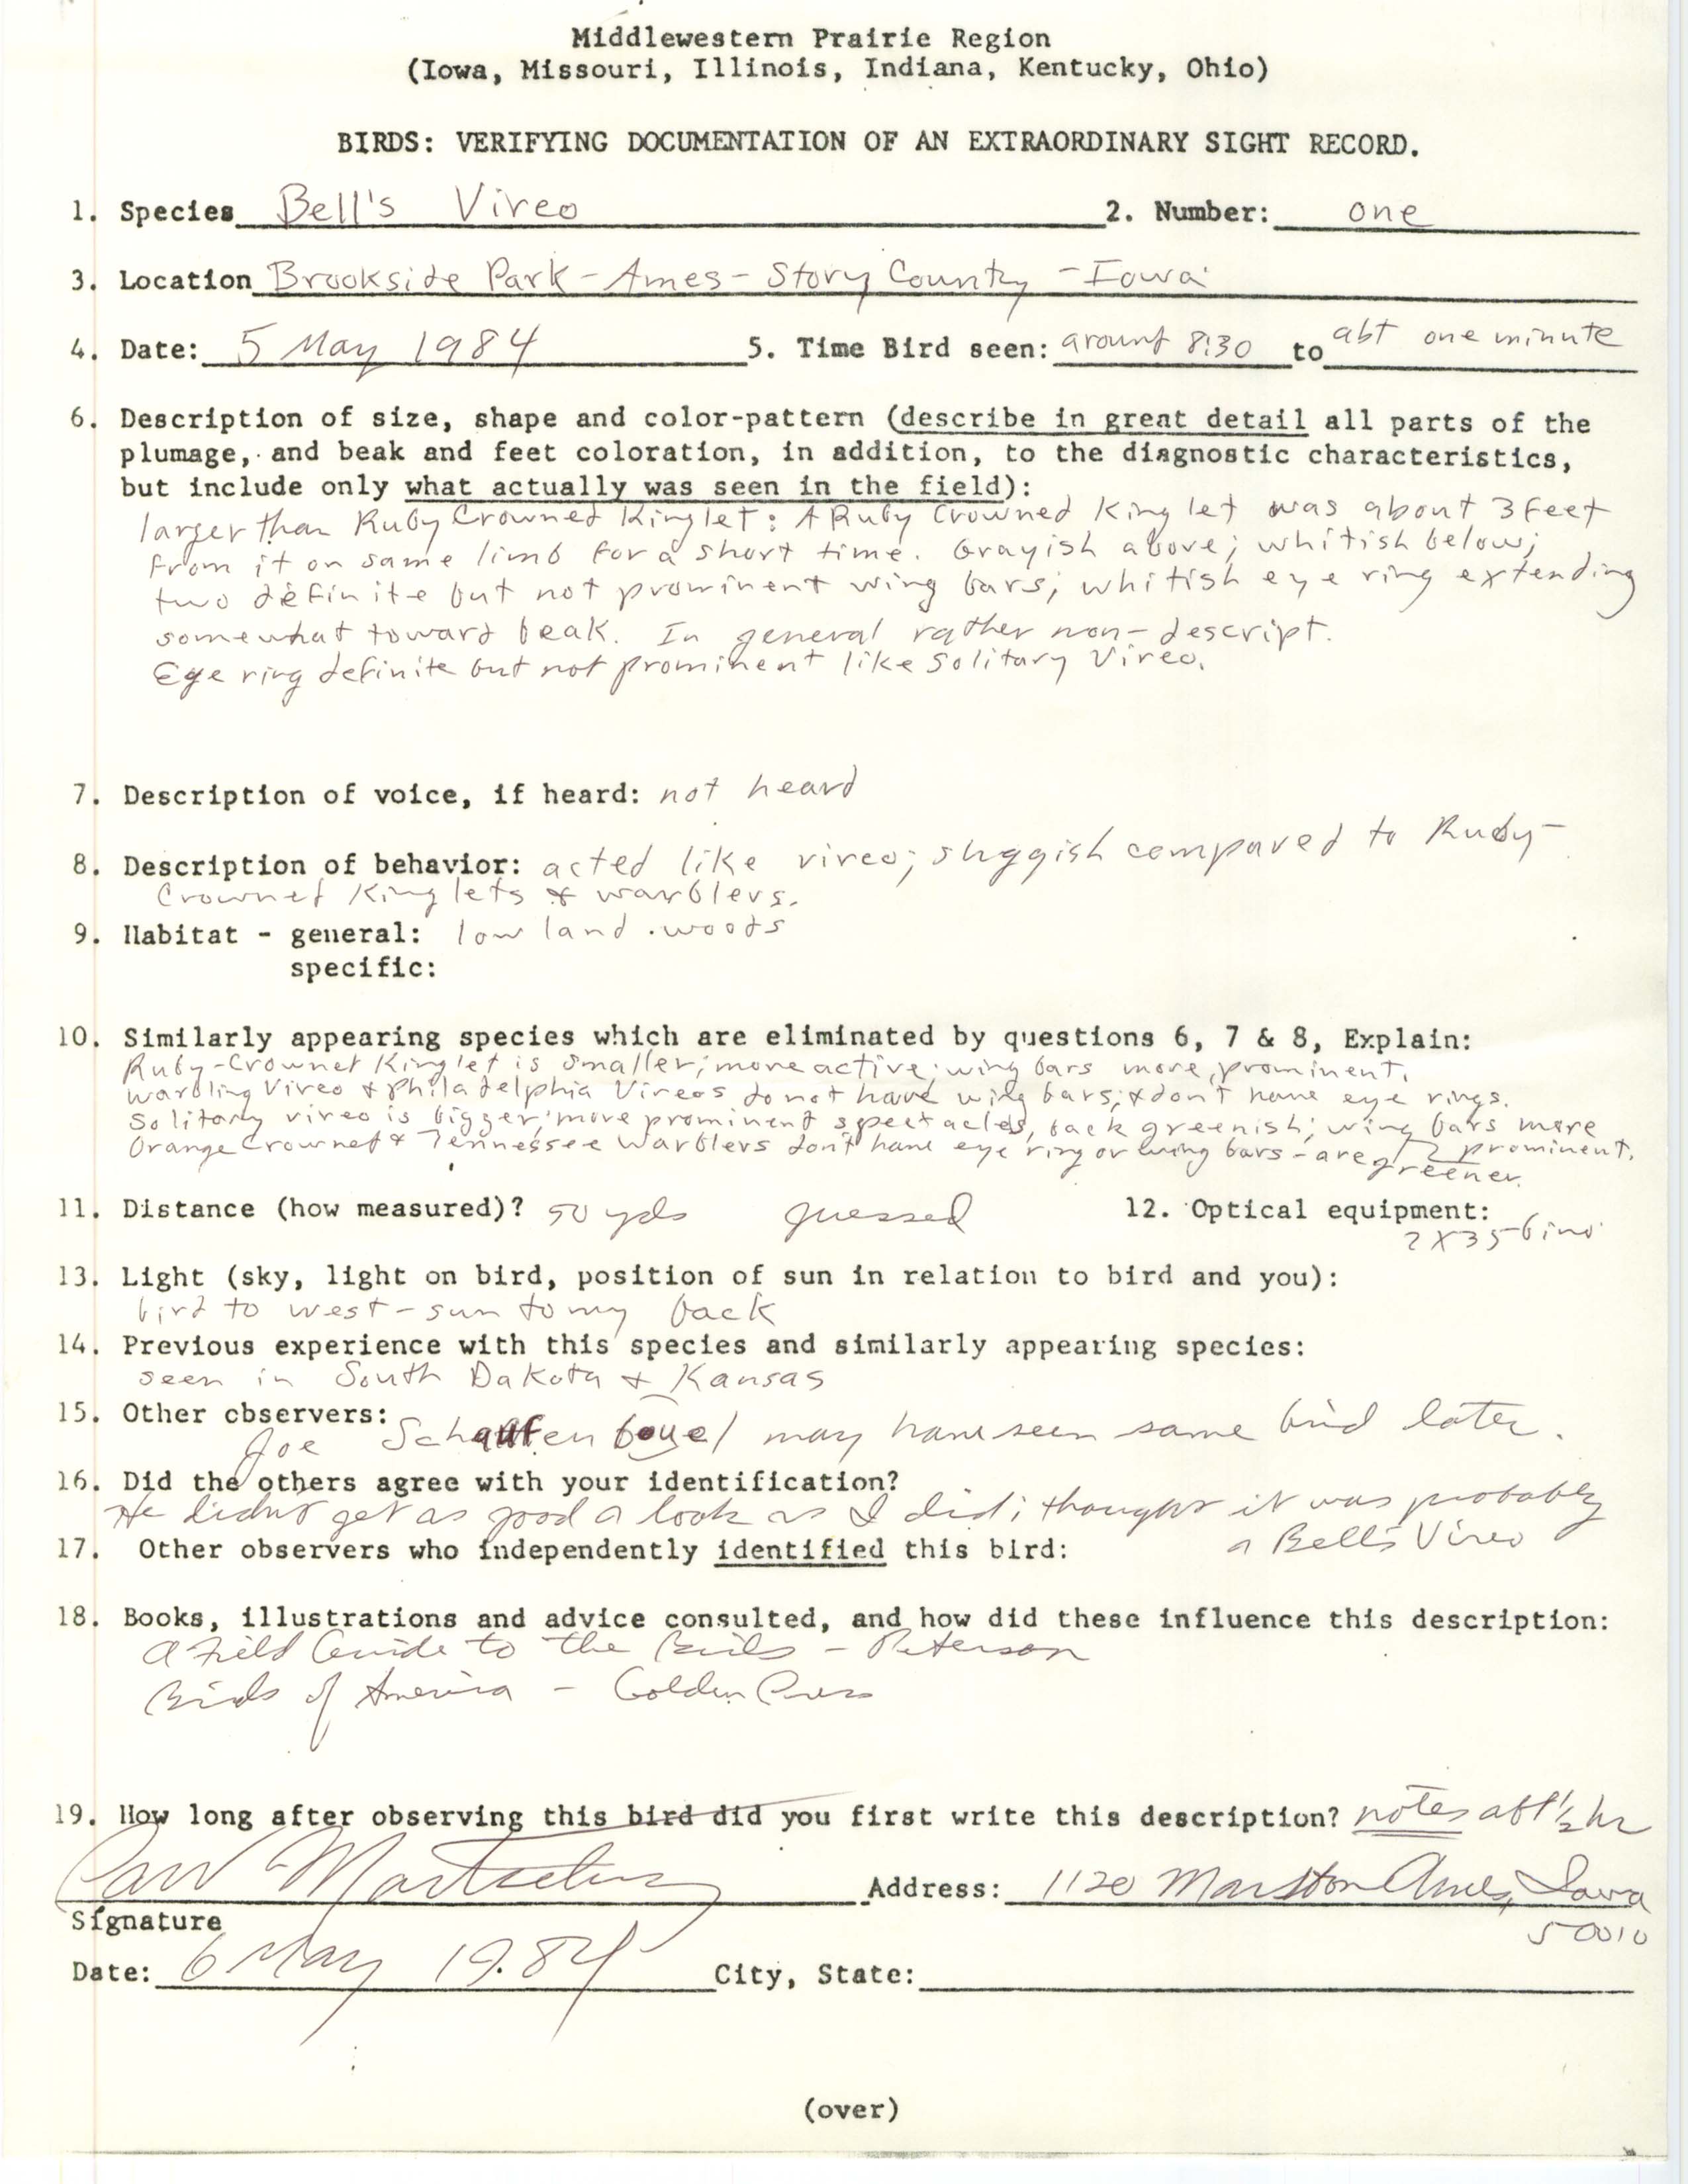 Rare bird documentation form for Bell's Vireo at Brookside Park in Ames, 1984